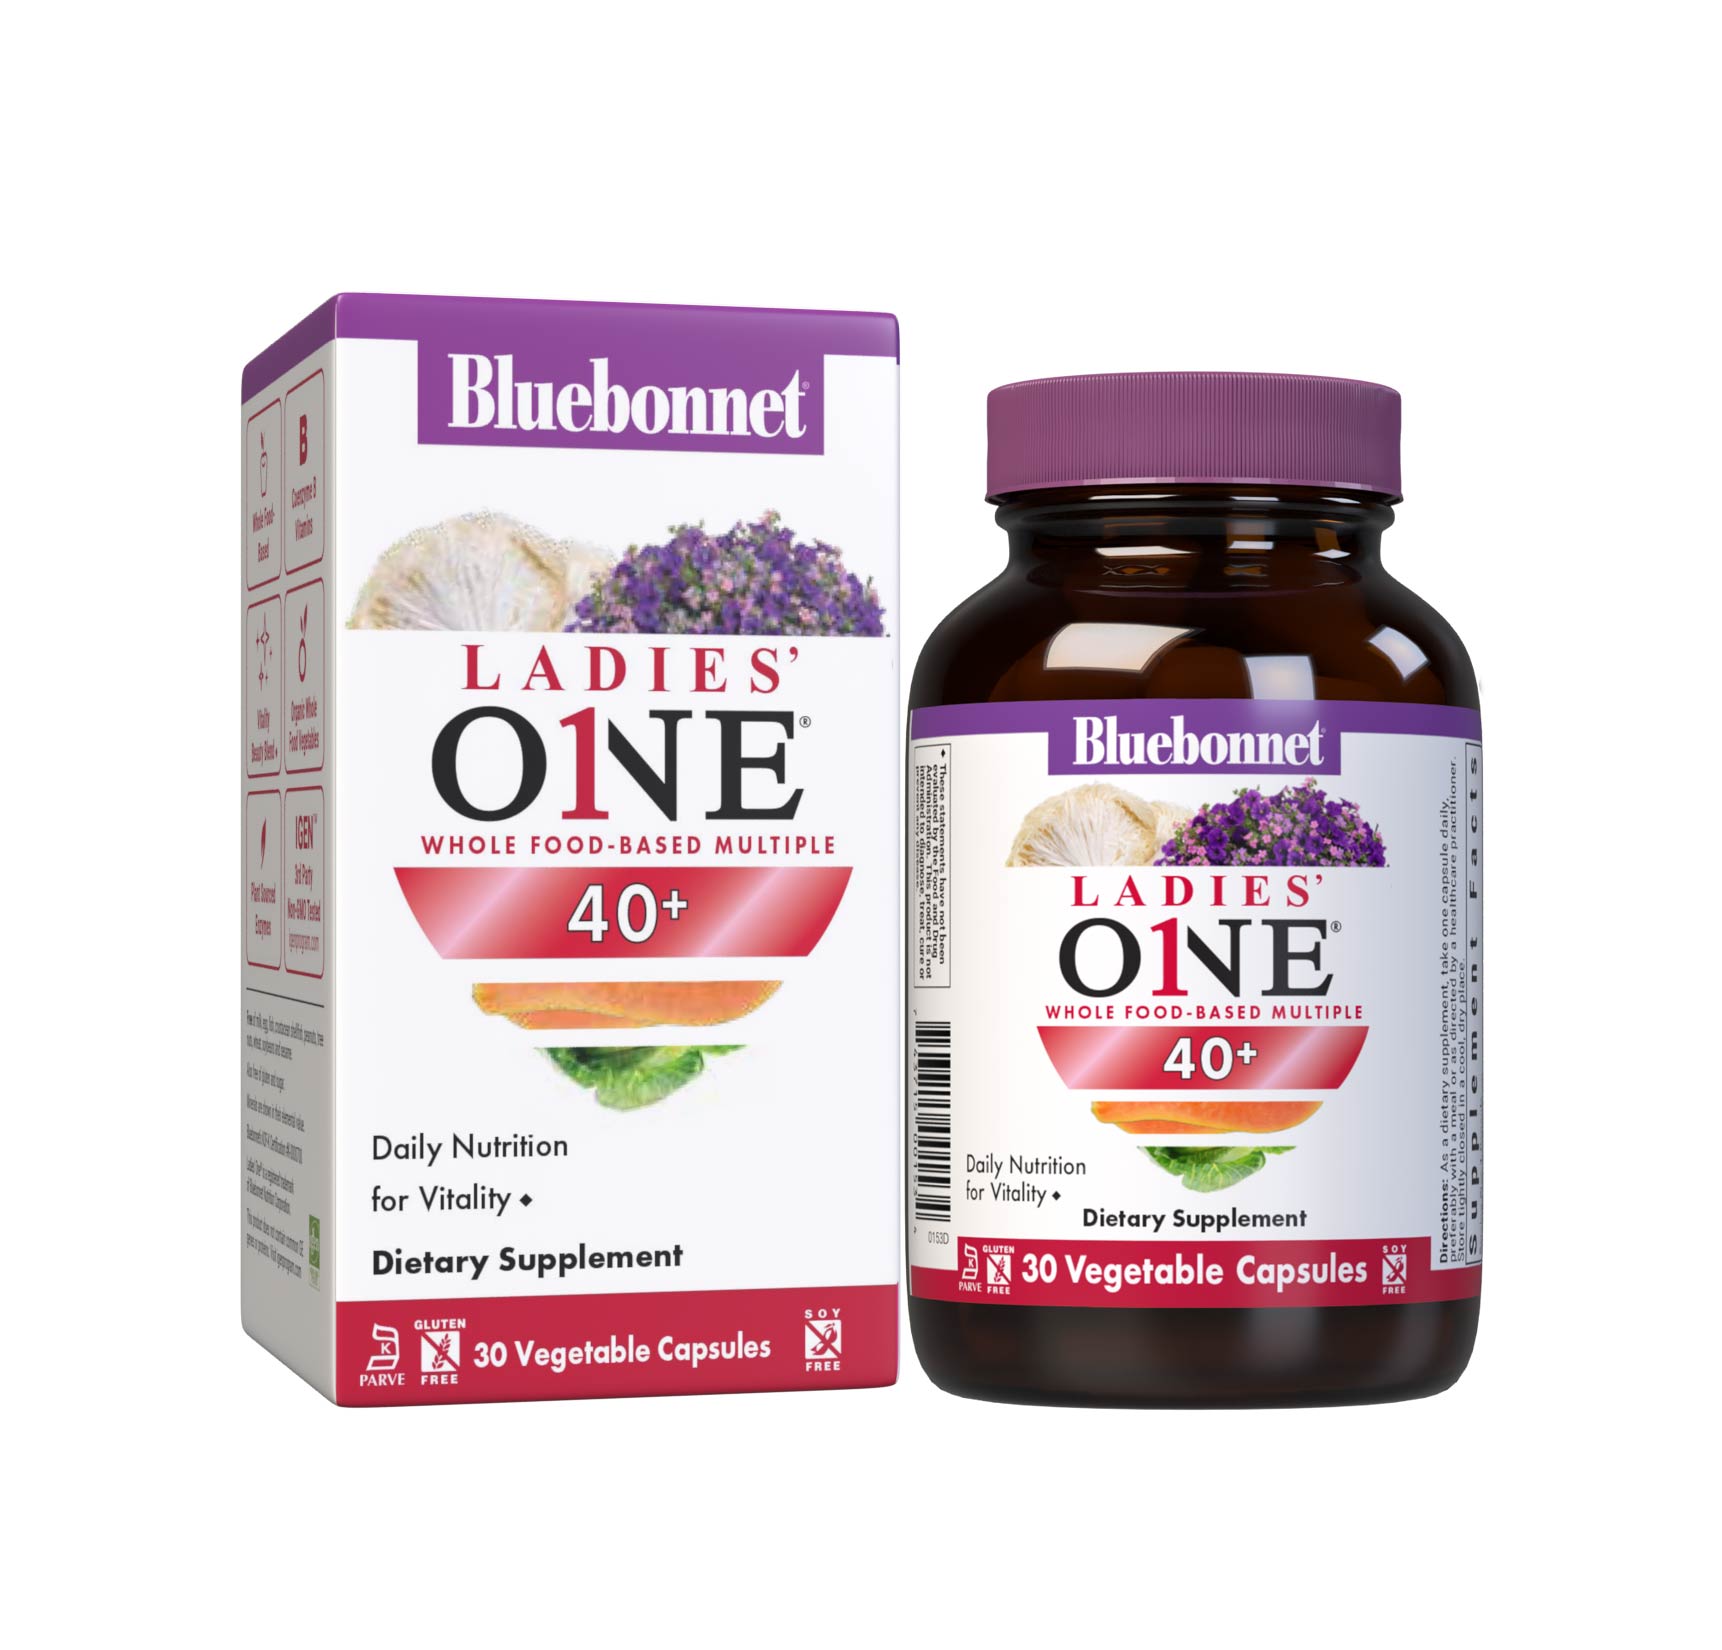 Bluebonnet’s Ladies’ ONE 40+ Whole Food-Based Multiple 30 Vegetable Capsules are formulated for daily nutritional support and vitality for women over 40. Helps to increase energy and vitality, protect beautiful skin, enhance mood, and support heart health. Bottle with box #size_30 count